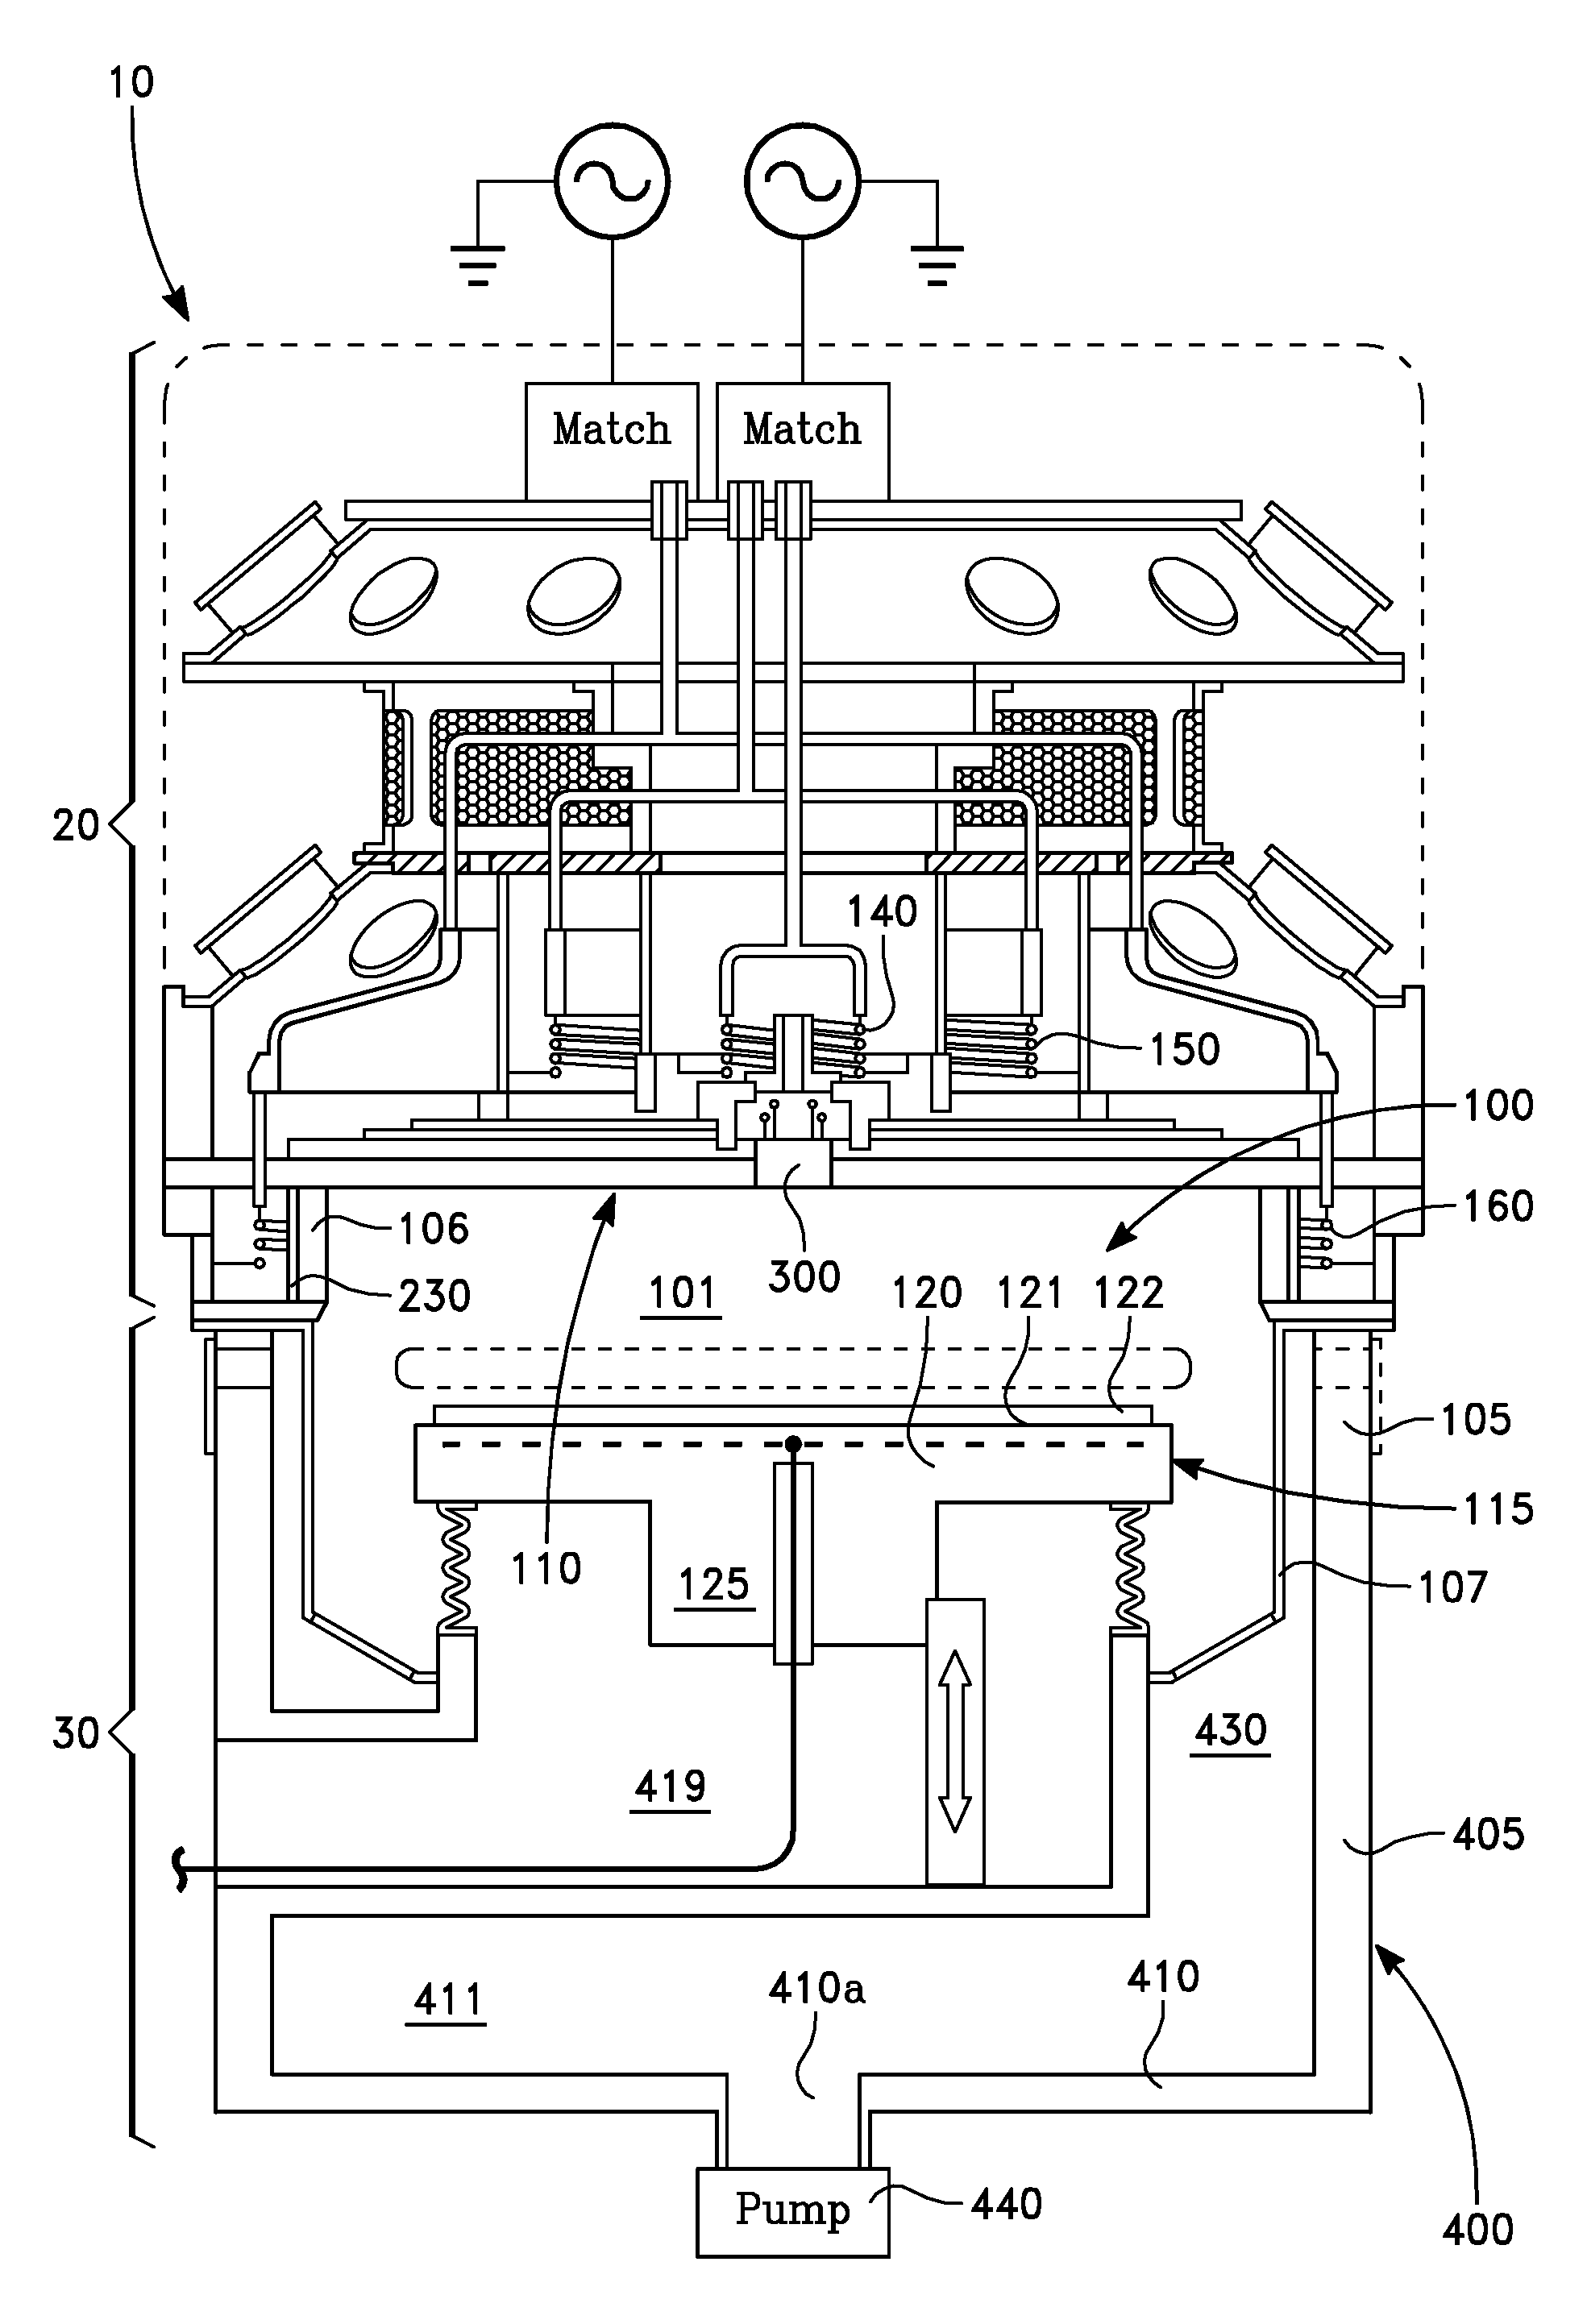 Multiple coil inductively coupled plasma source with offset frequencies and double-walled shielding